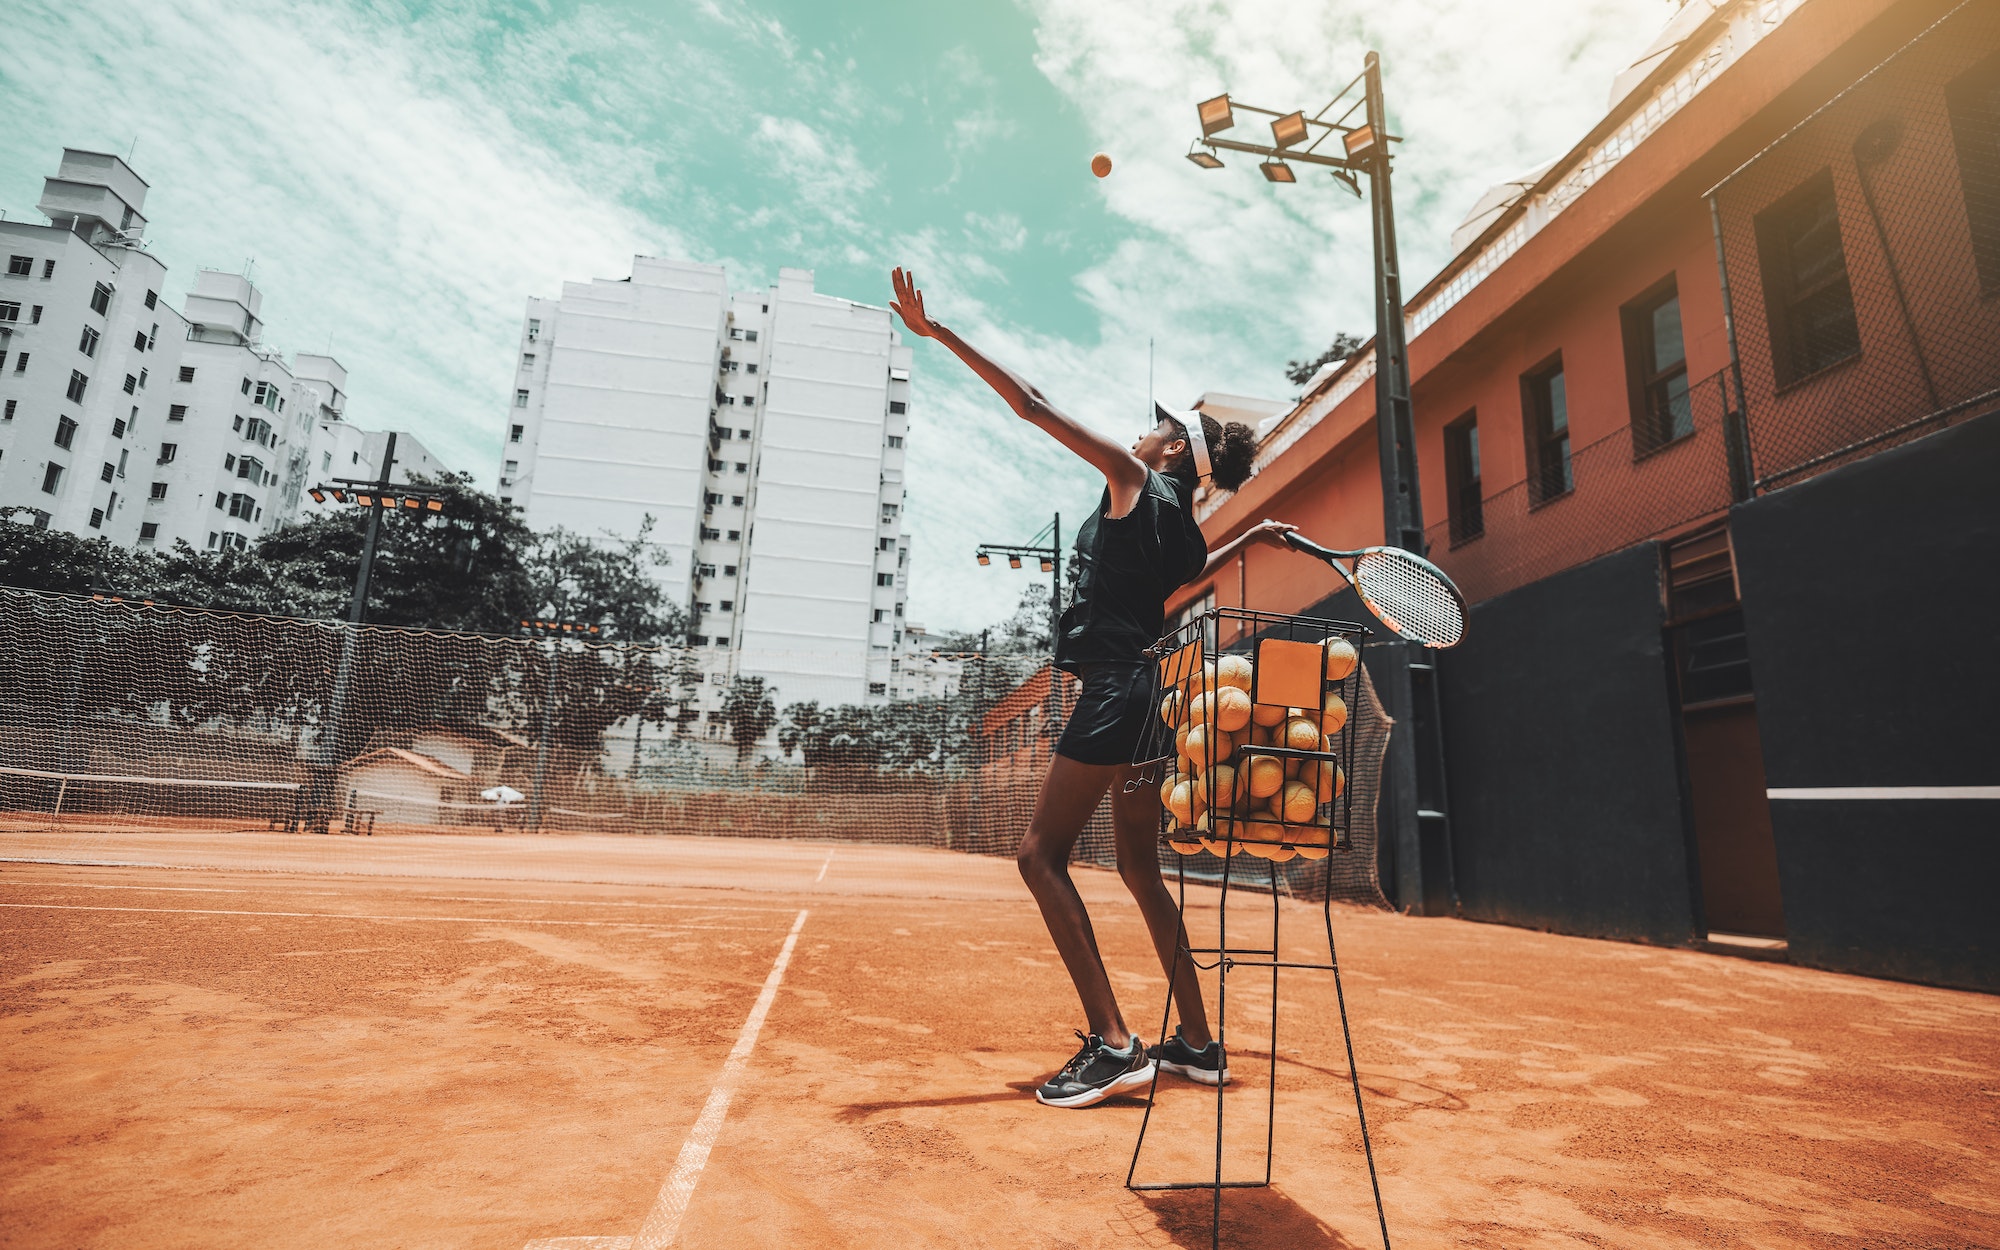 Black girl playing tennis on a court